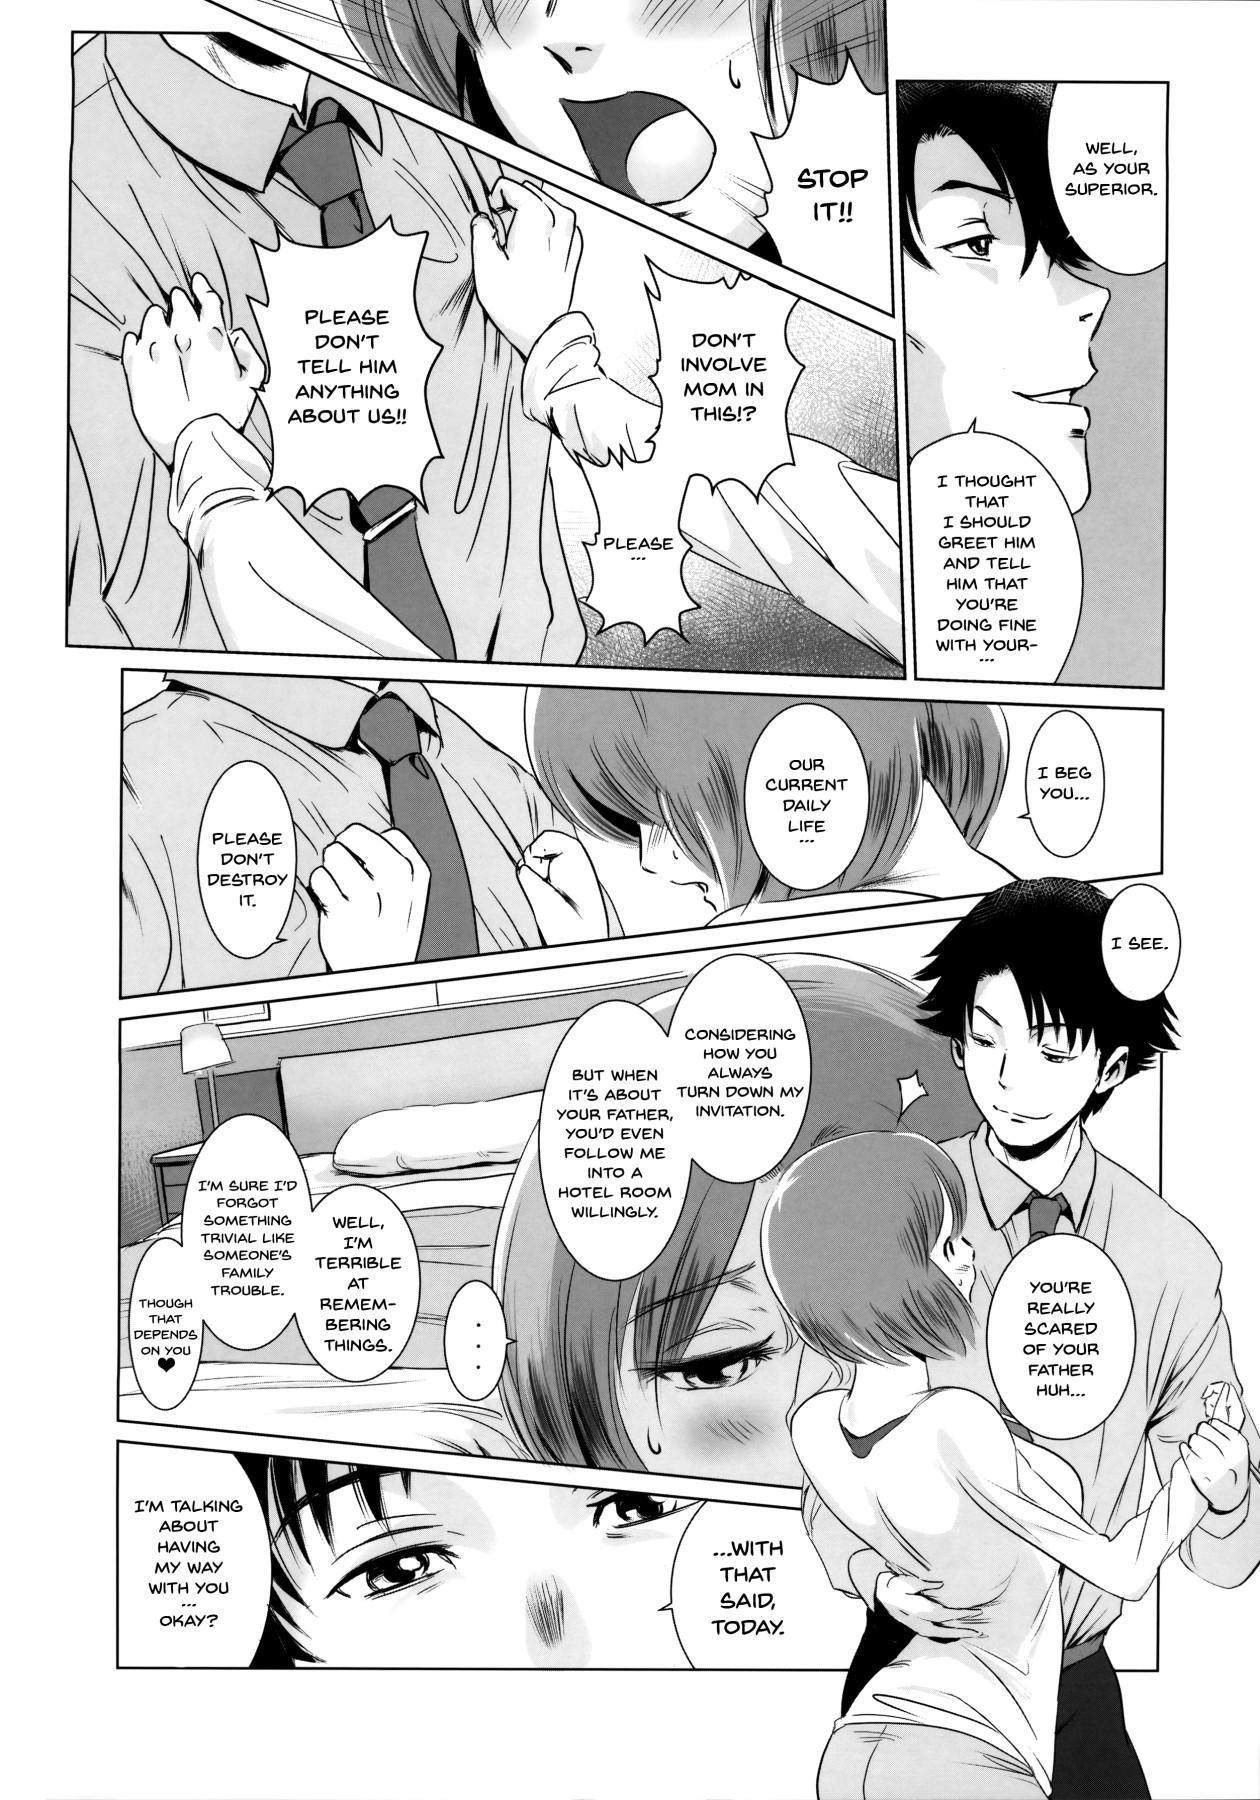 Spit Story of the 'N' Situation - Situation#1 Kyouhaku - Original Hermana - Page 12